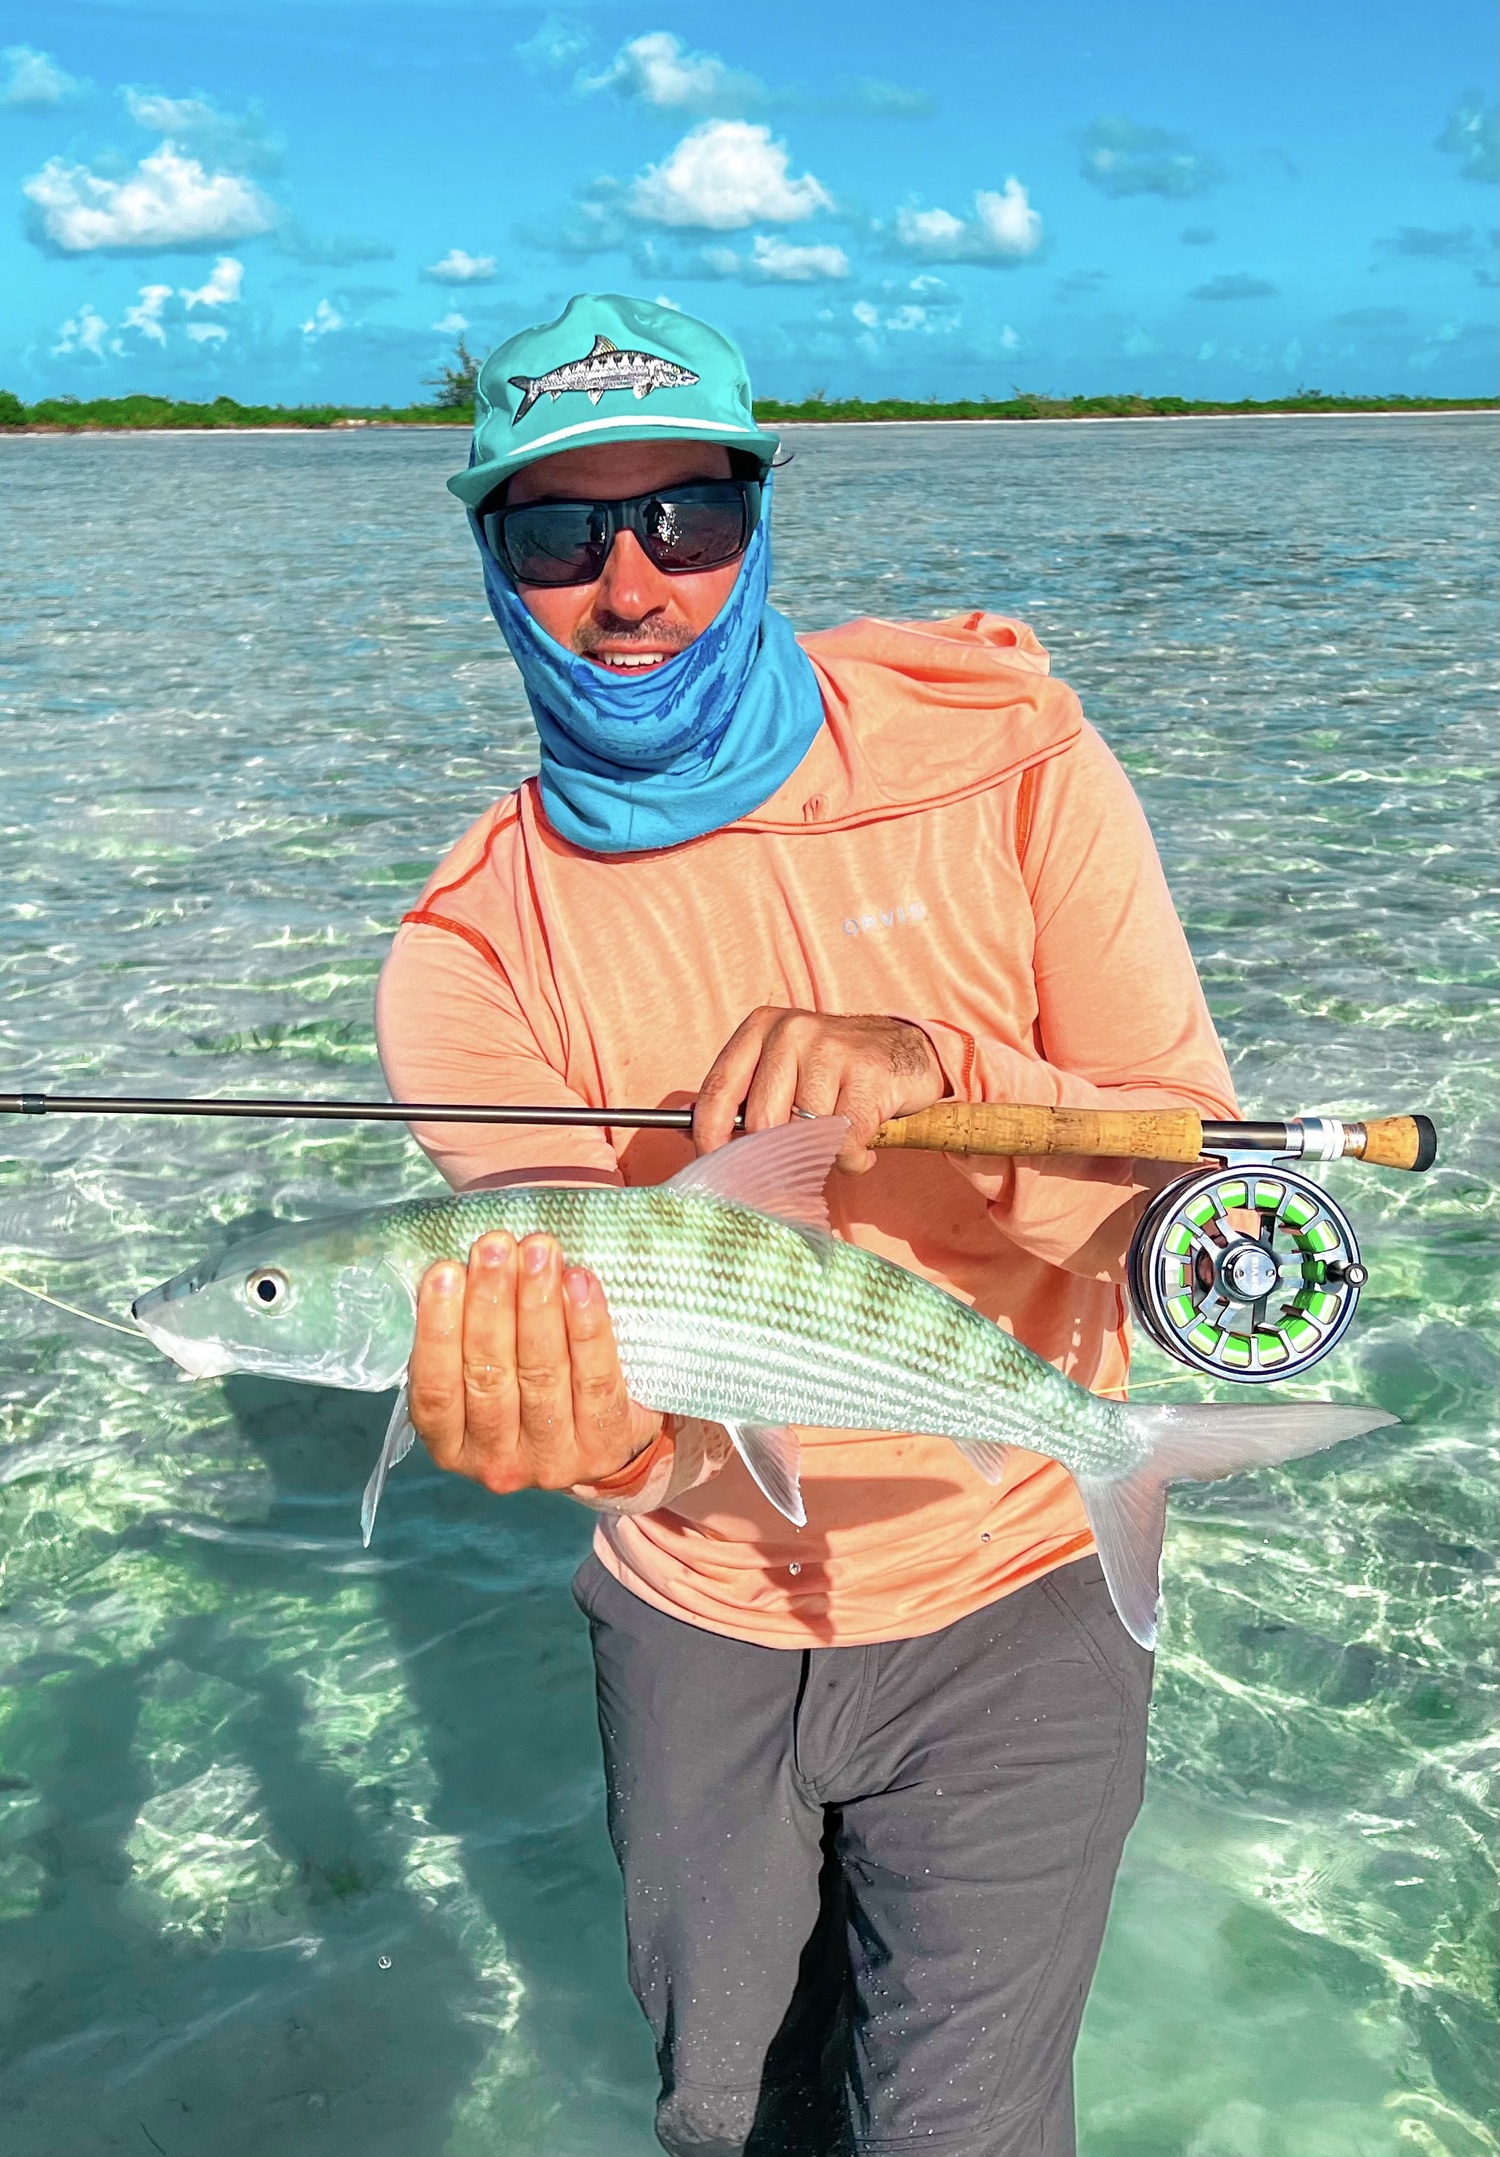 Steve Lobosco snuck away from a family vacation in the Turks & Caicos just long enough to catch a couple nice bonefish on fly.